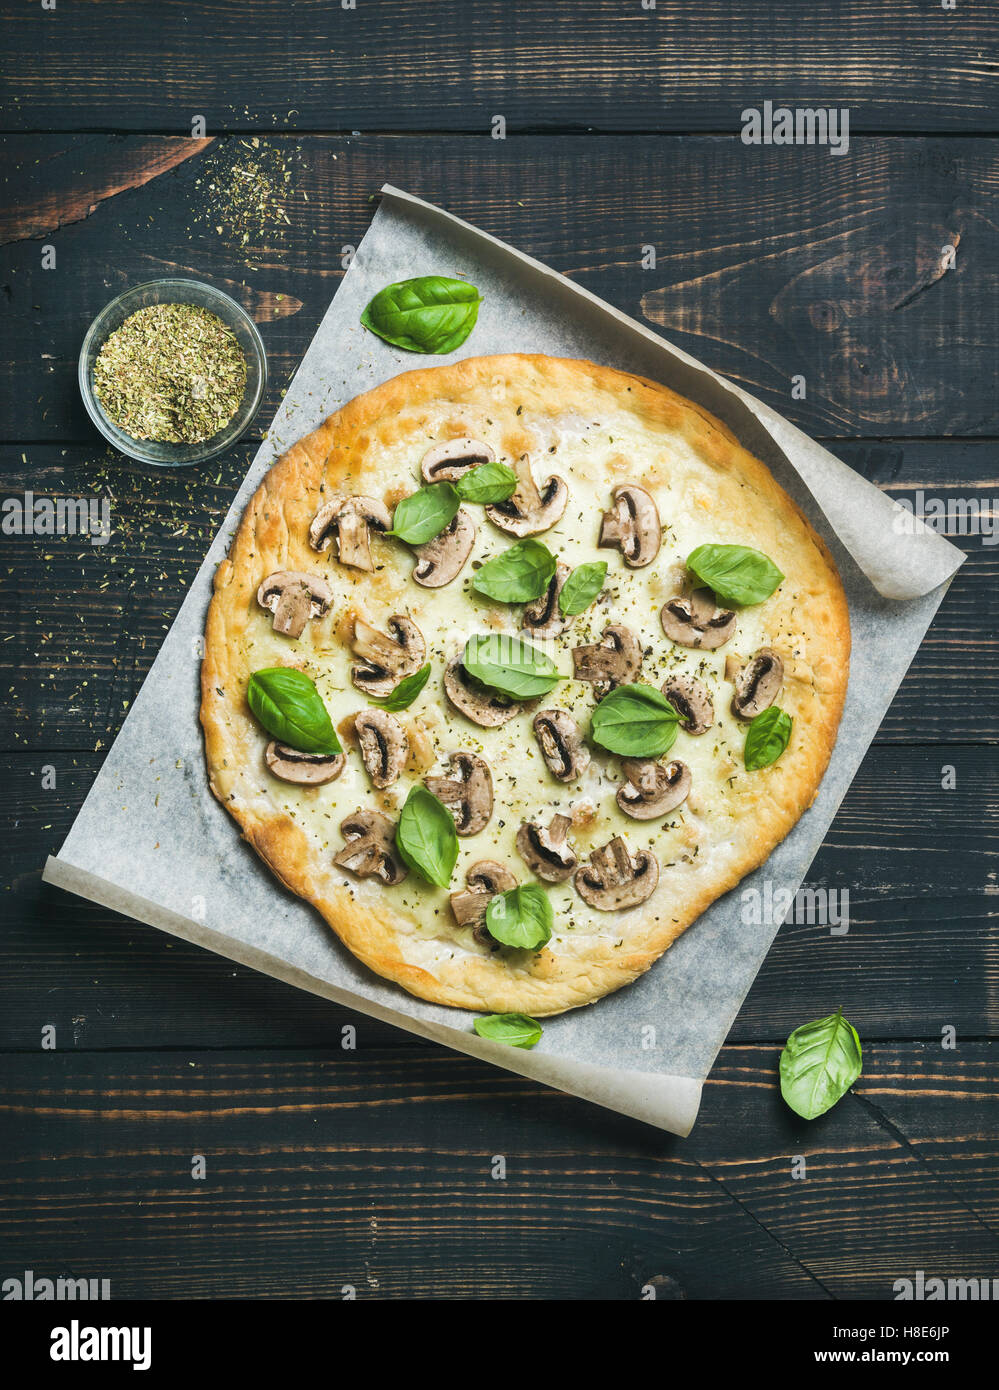 Homemade mushroom pizza with basil leaves and spices in glass on baking paper over dark scorched wooden background, top view, ve Stock Photo